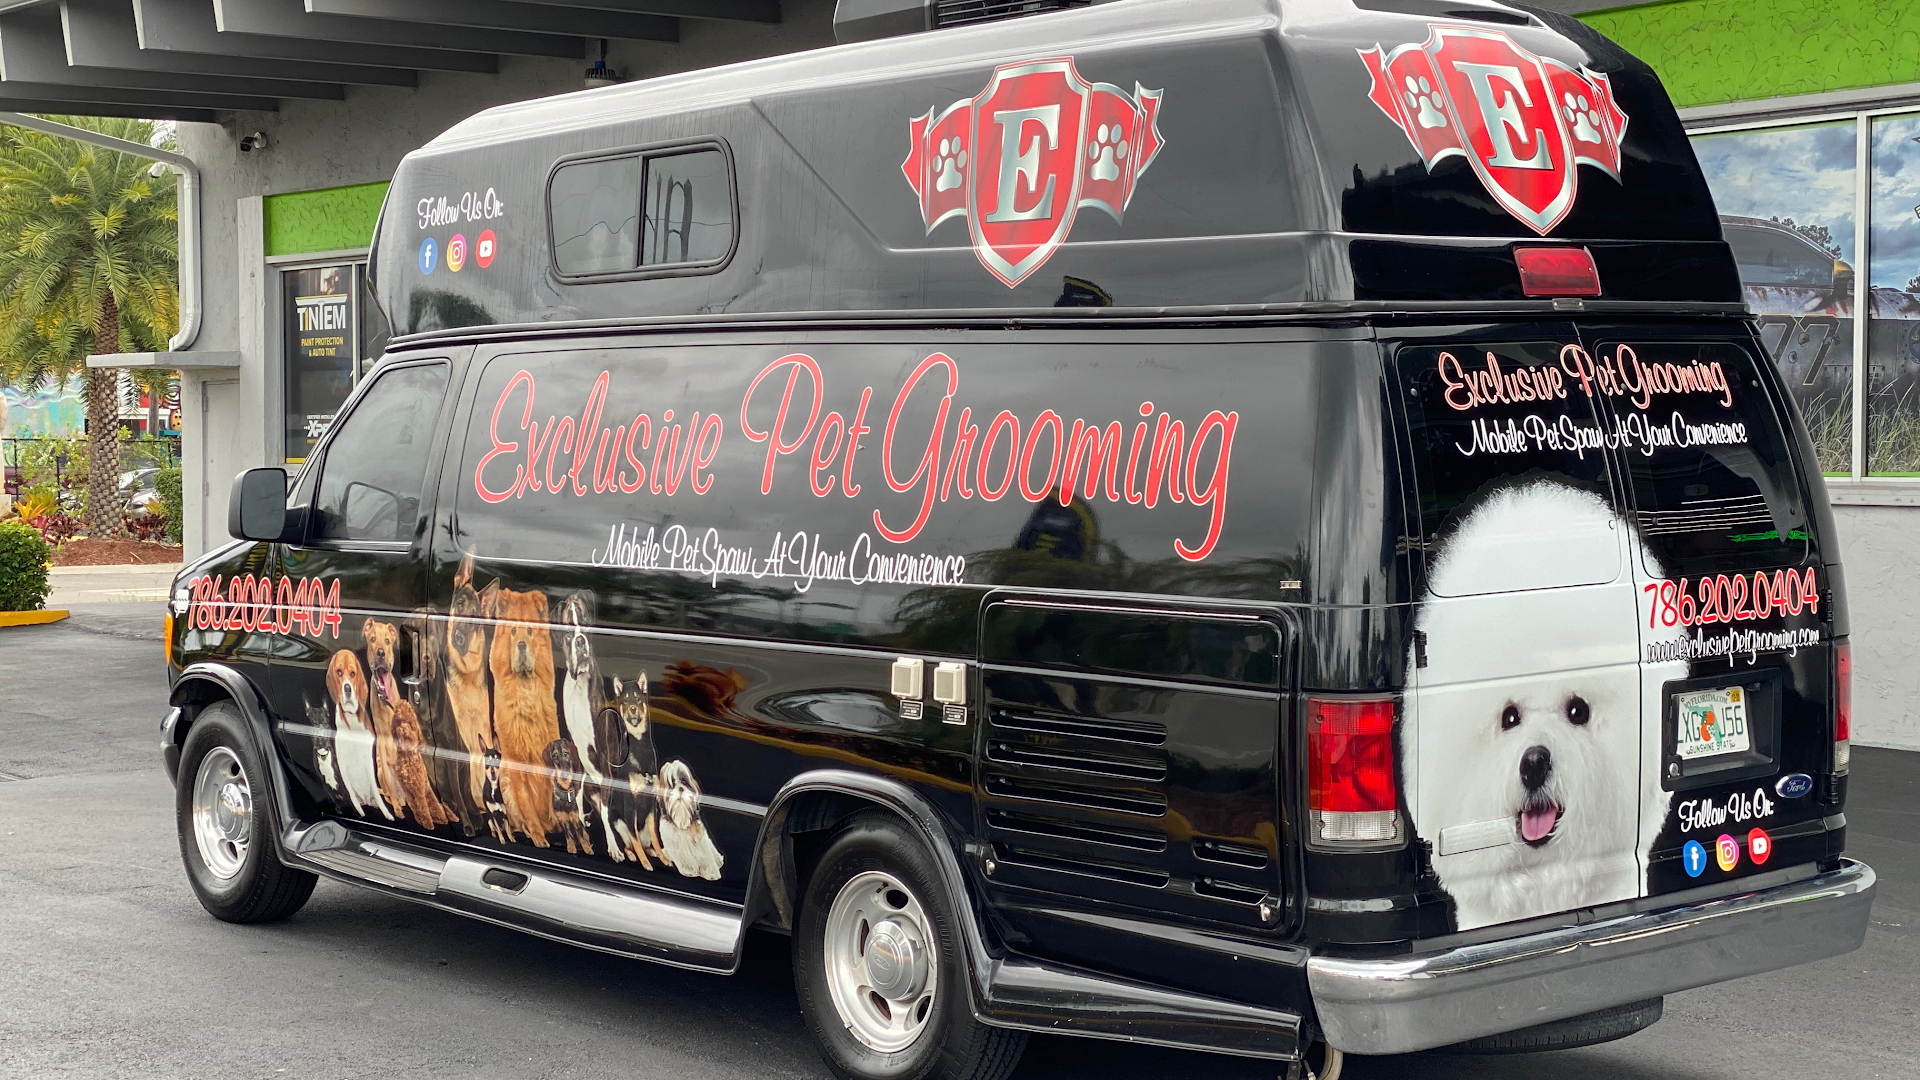 Exclusive Pet Grooming Mobile Service